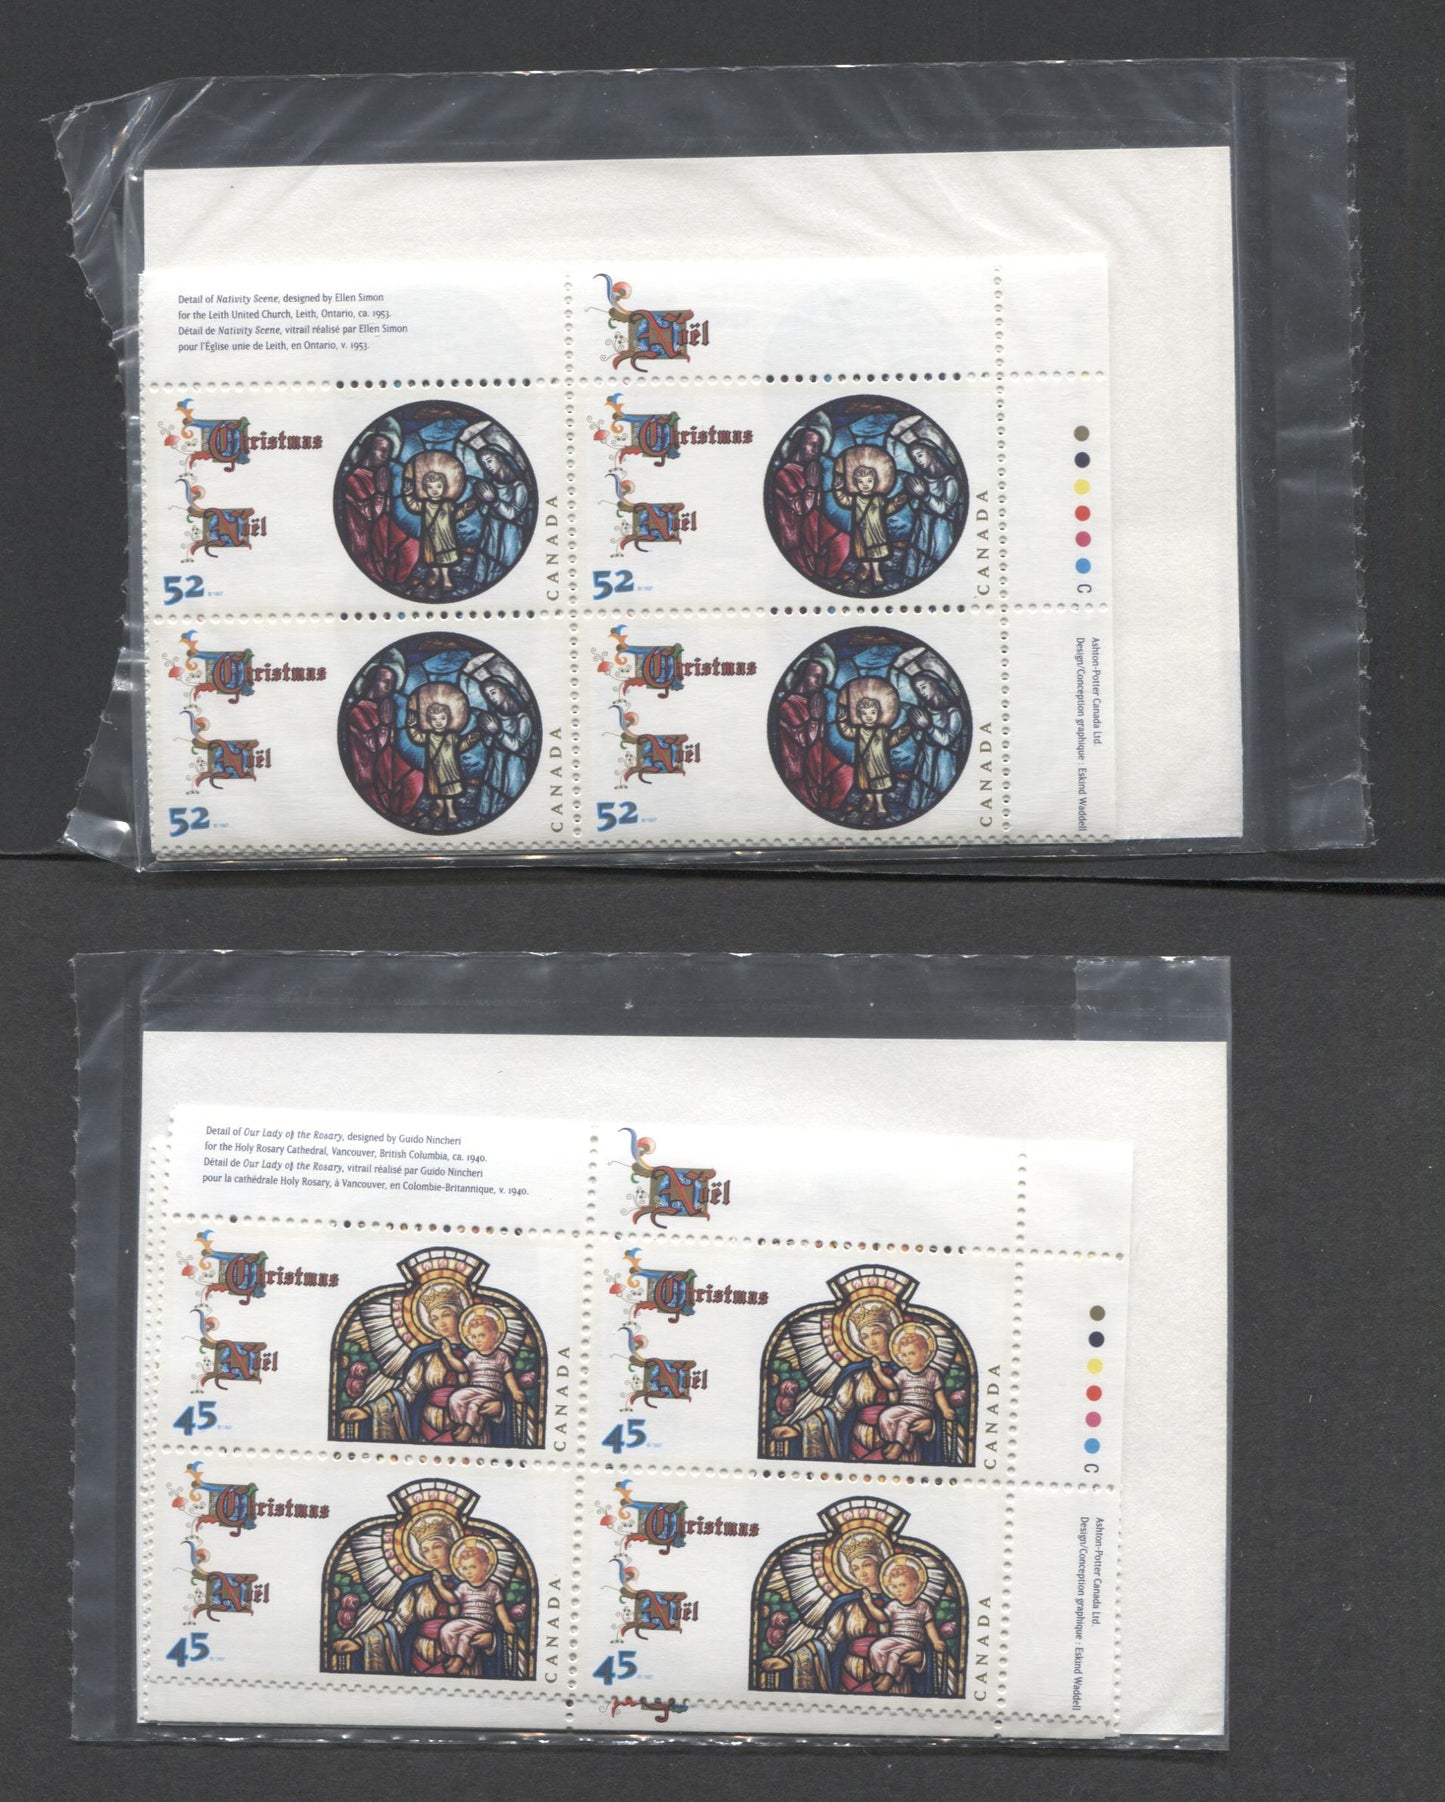 Lot 320 Canada #1669-1670 45c & 52c Multicolored Our Lady Of The Rosary & Nativity Scene 1997 Christmas, Canada Post Sealed Pack of Inscription Blocks on Coated Paper With HB Type 6A Insert Card, VFNH, Unitrade Cat. $39